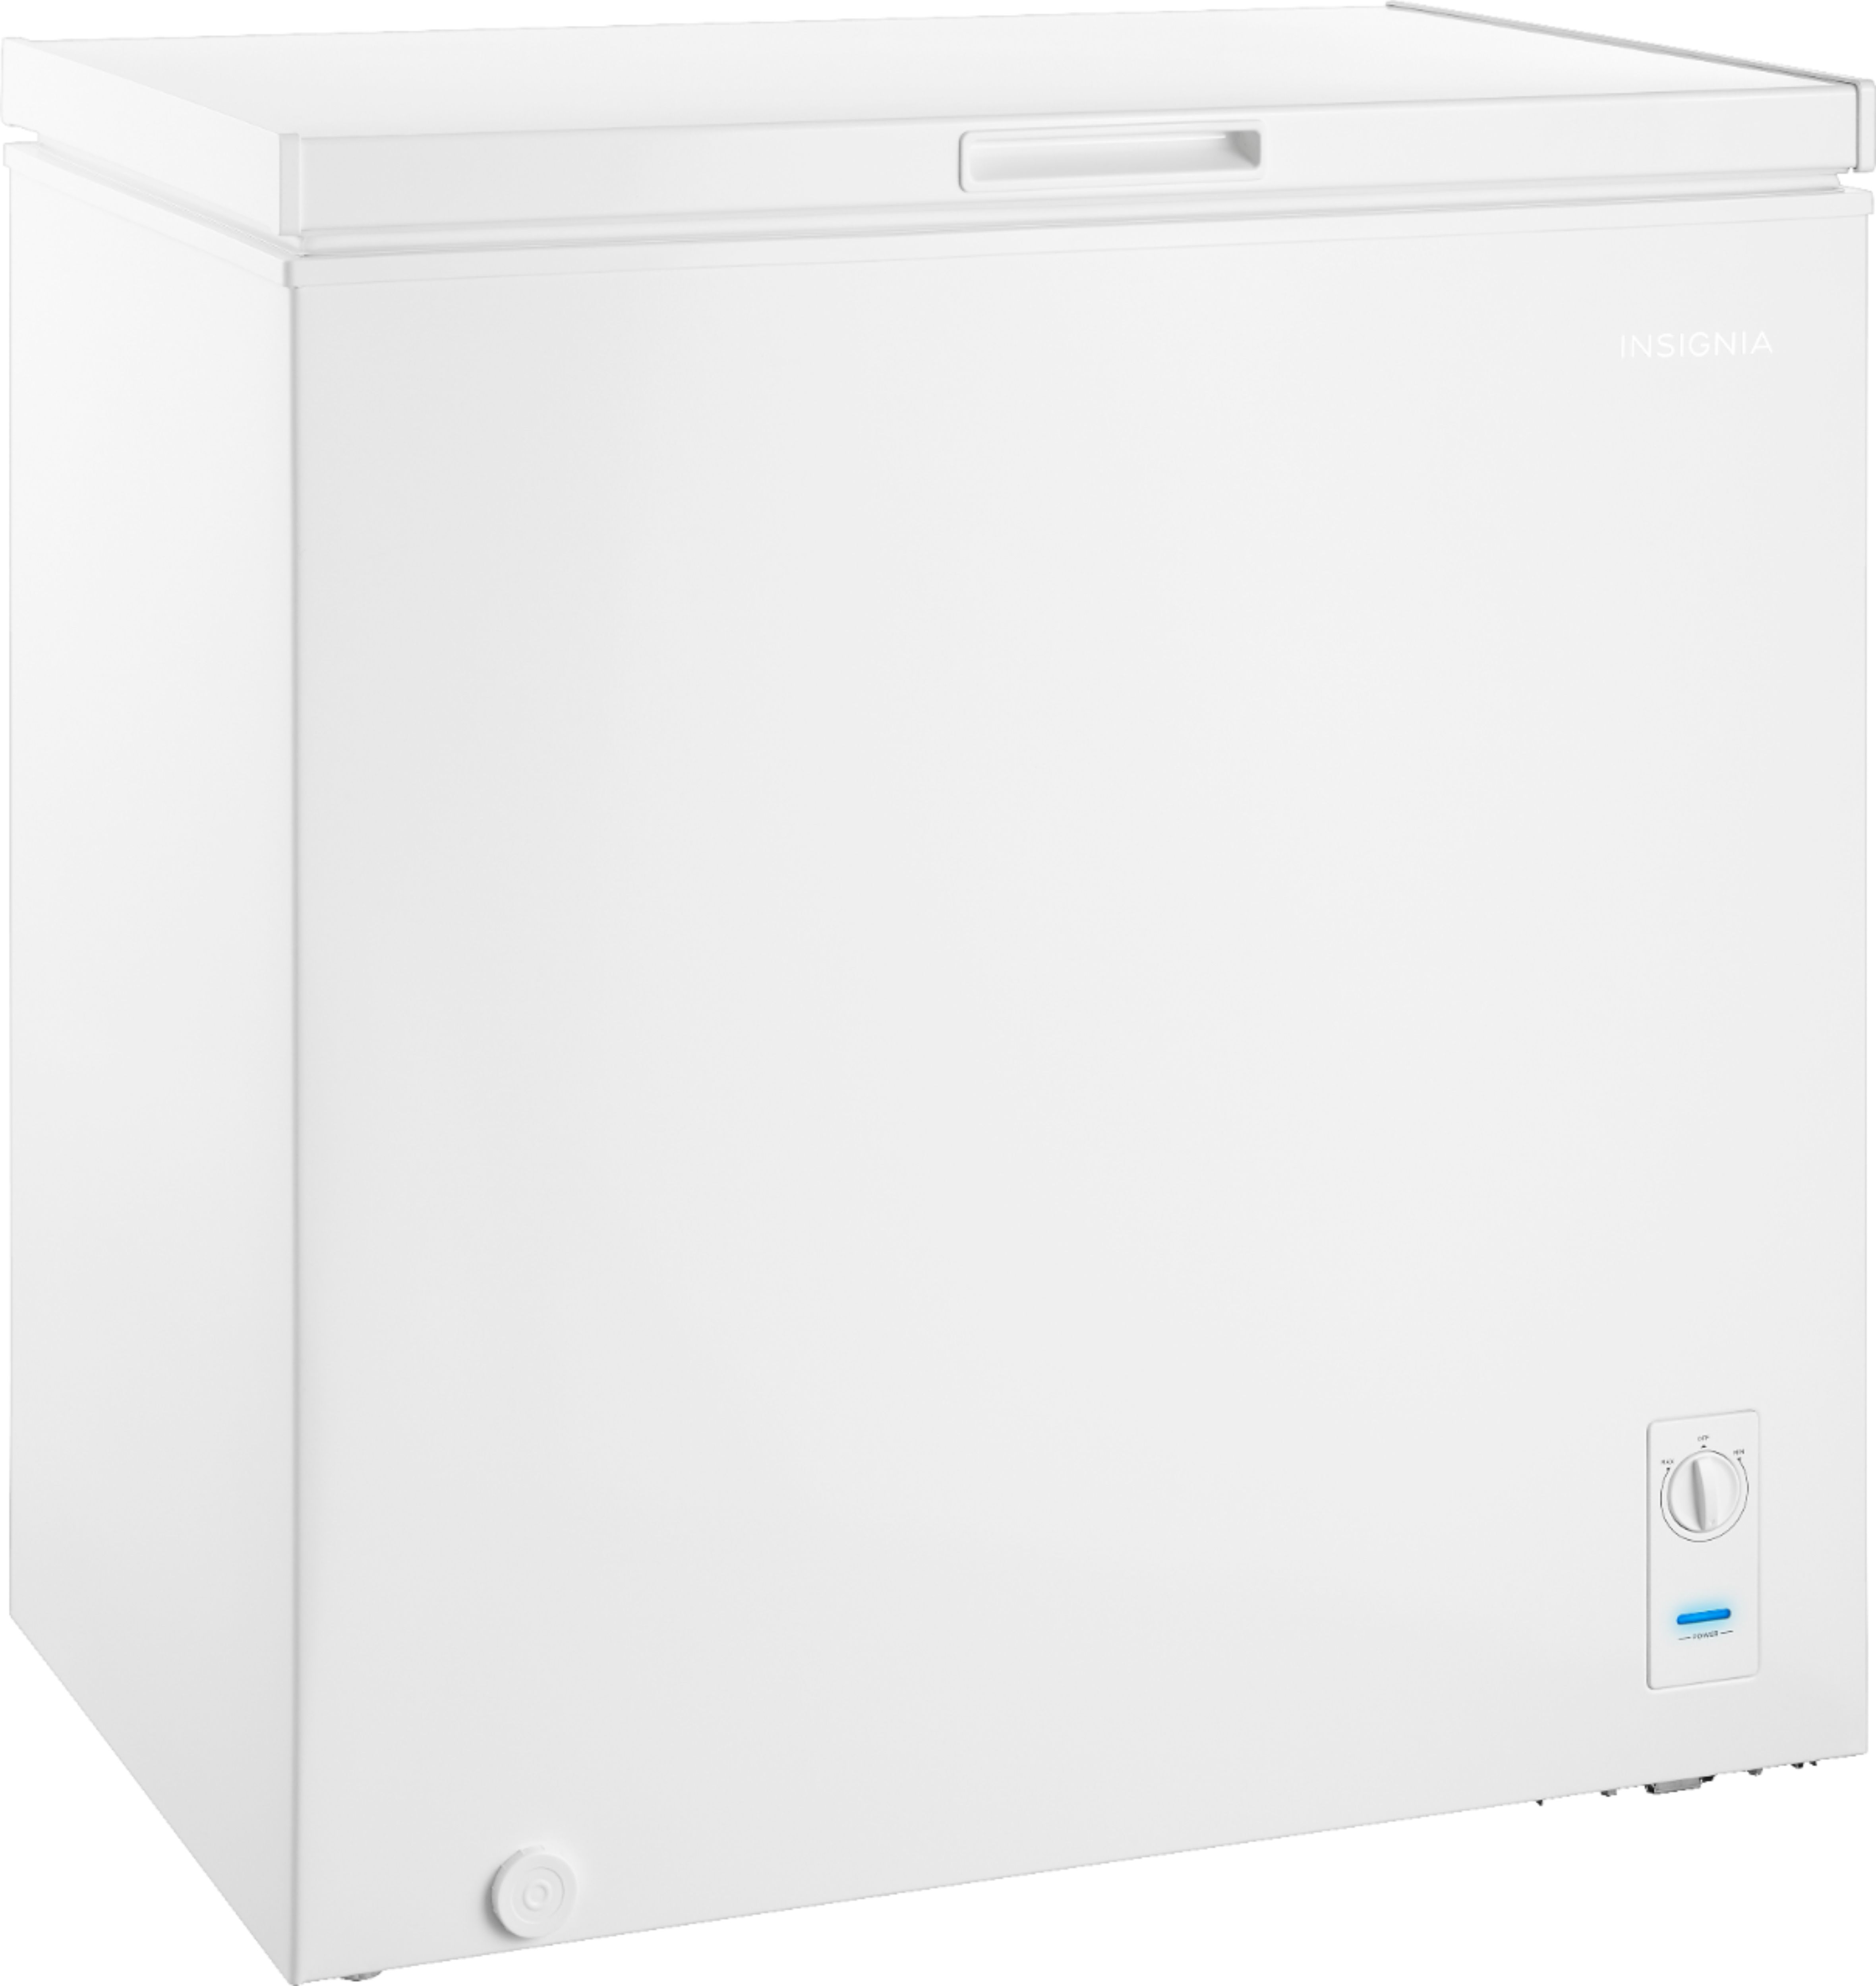 Angle View: Viking - Professional 7 Series 8.4 Cu. Ft. Upright Freezer with Interior Light - Slate Blue